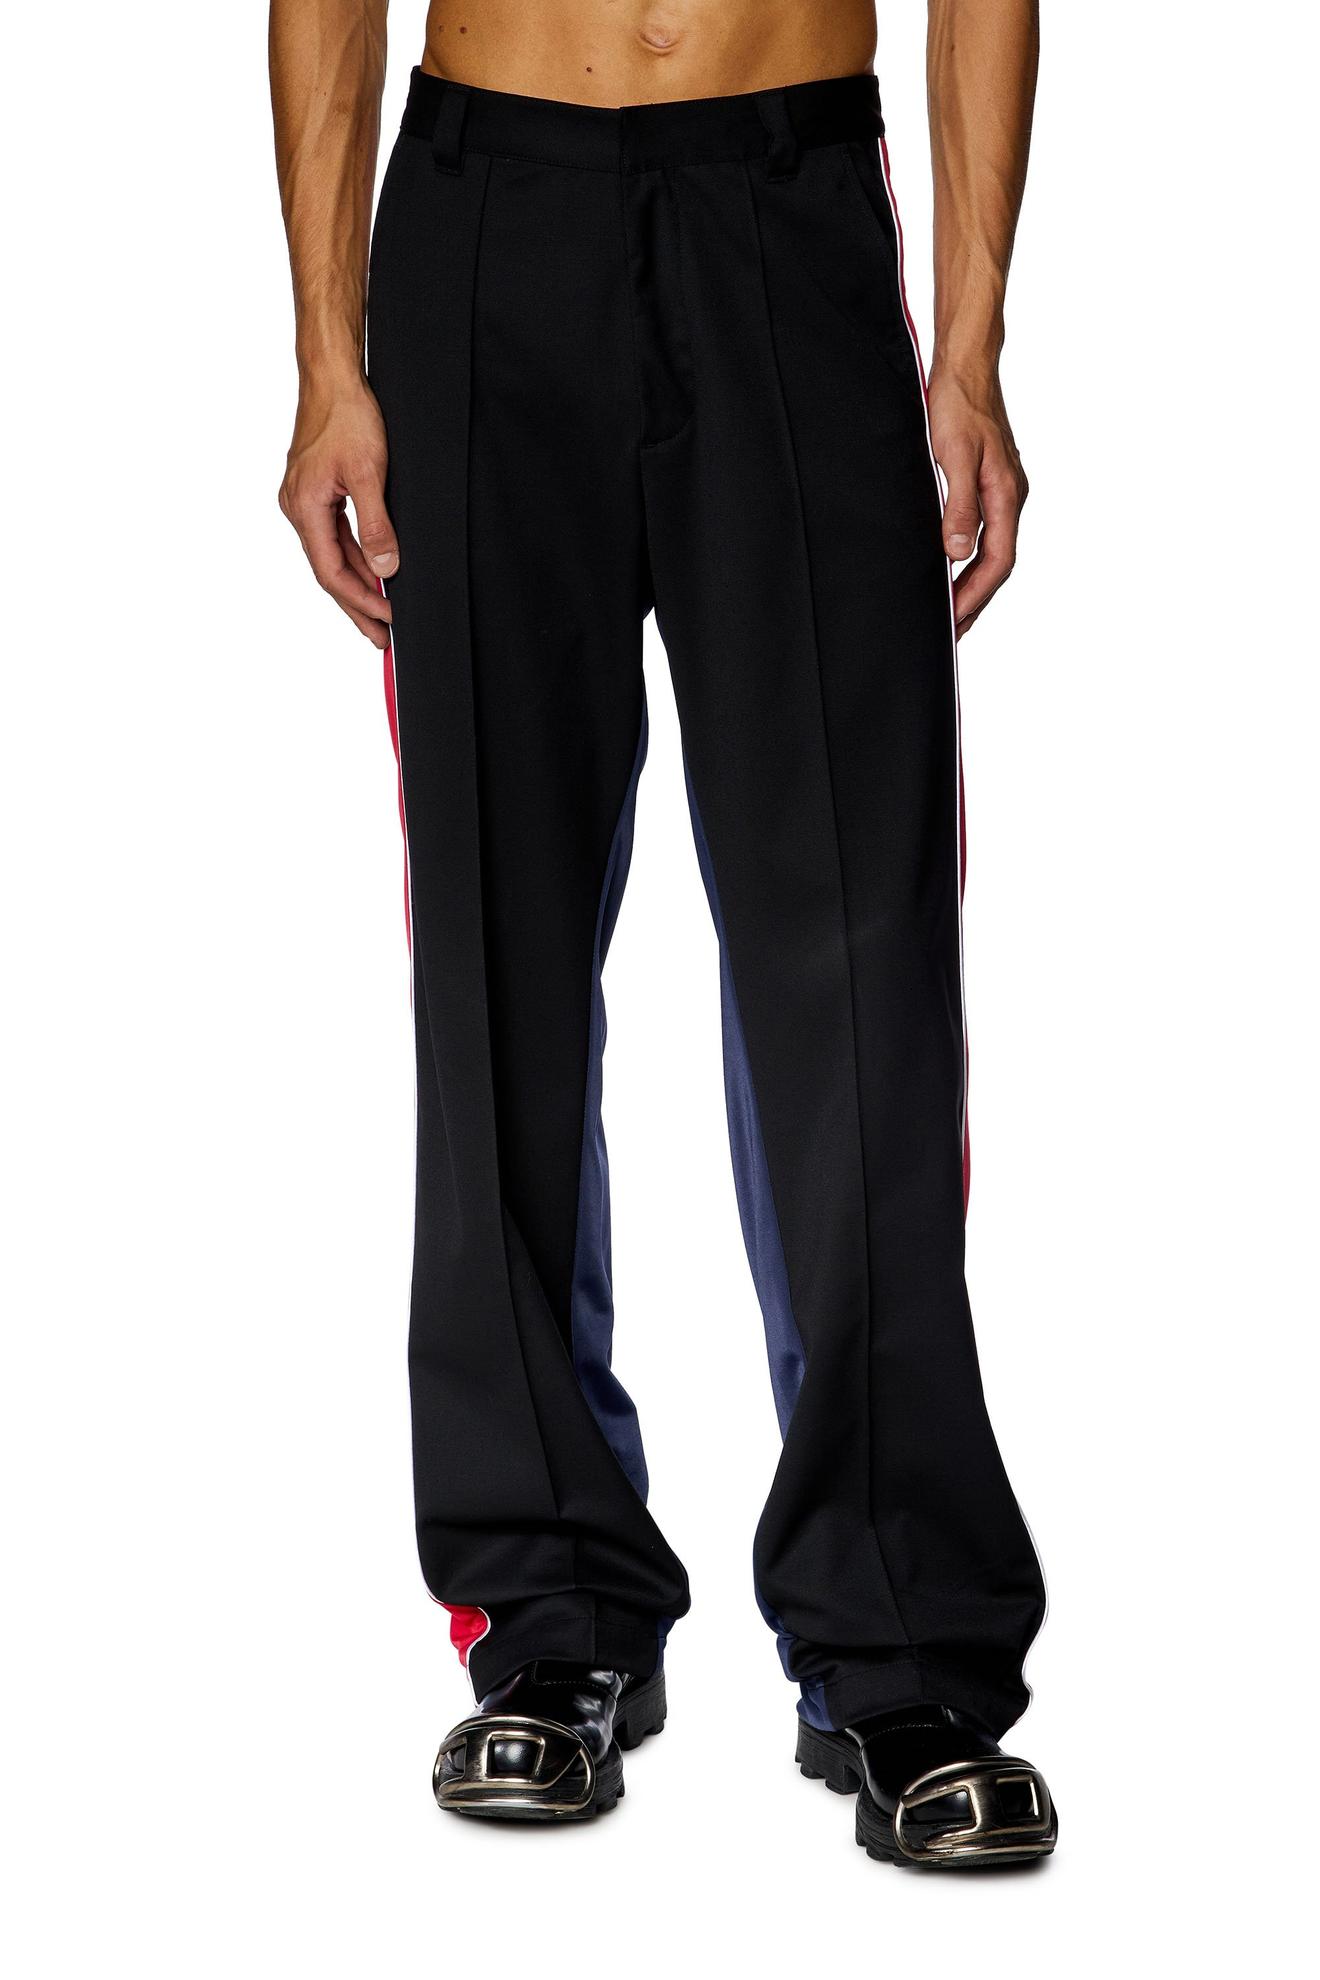 Hybrid pants in cool wool and tech jersey offers at £140 in Diesel